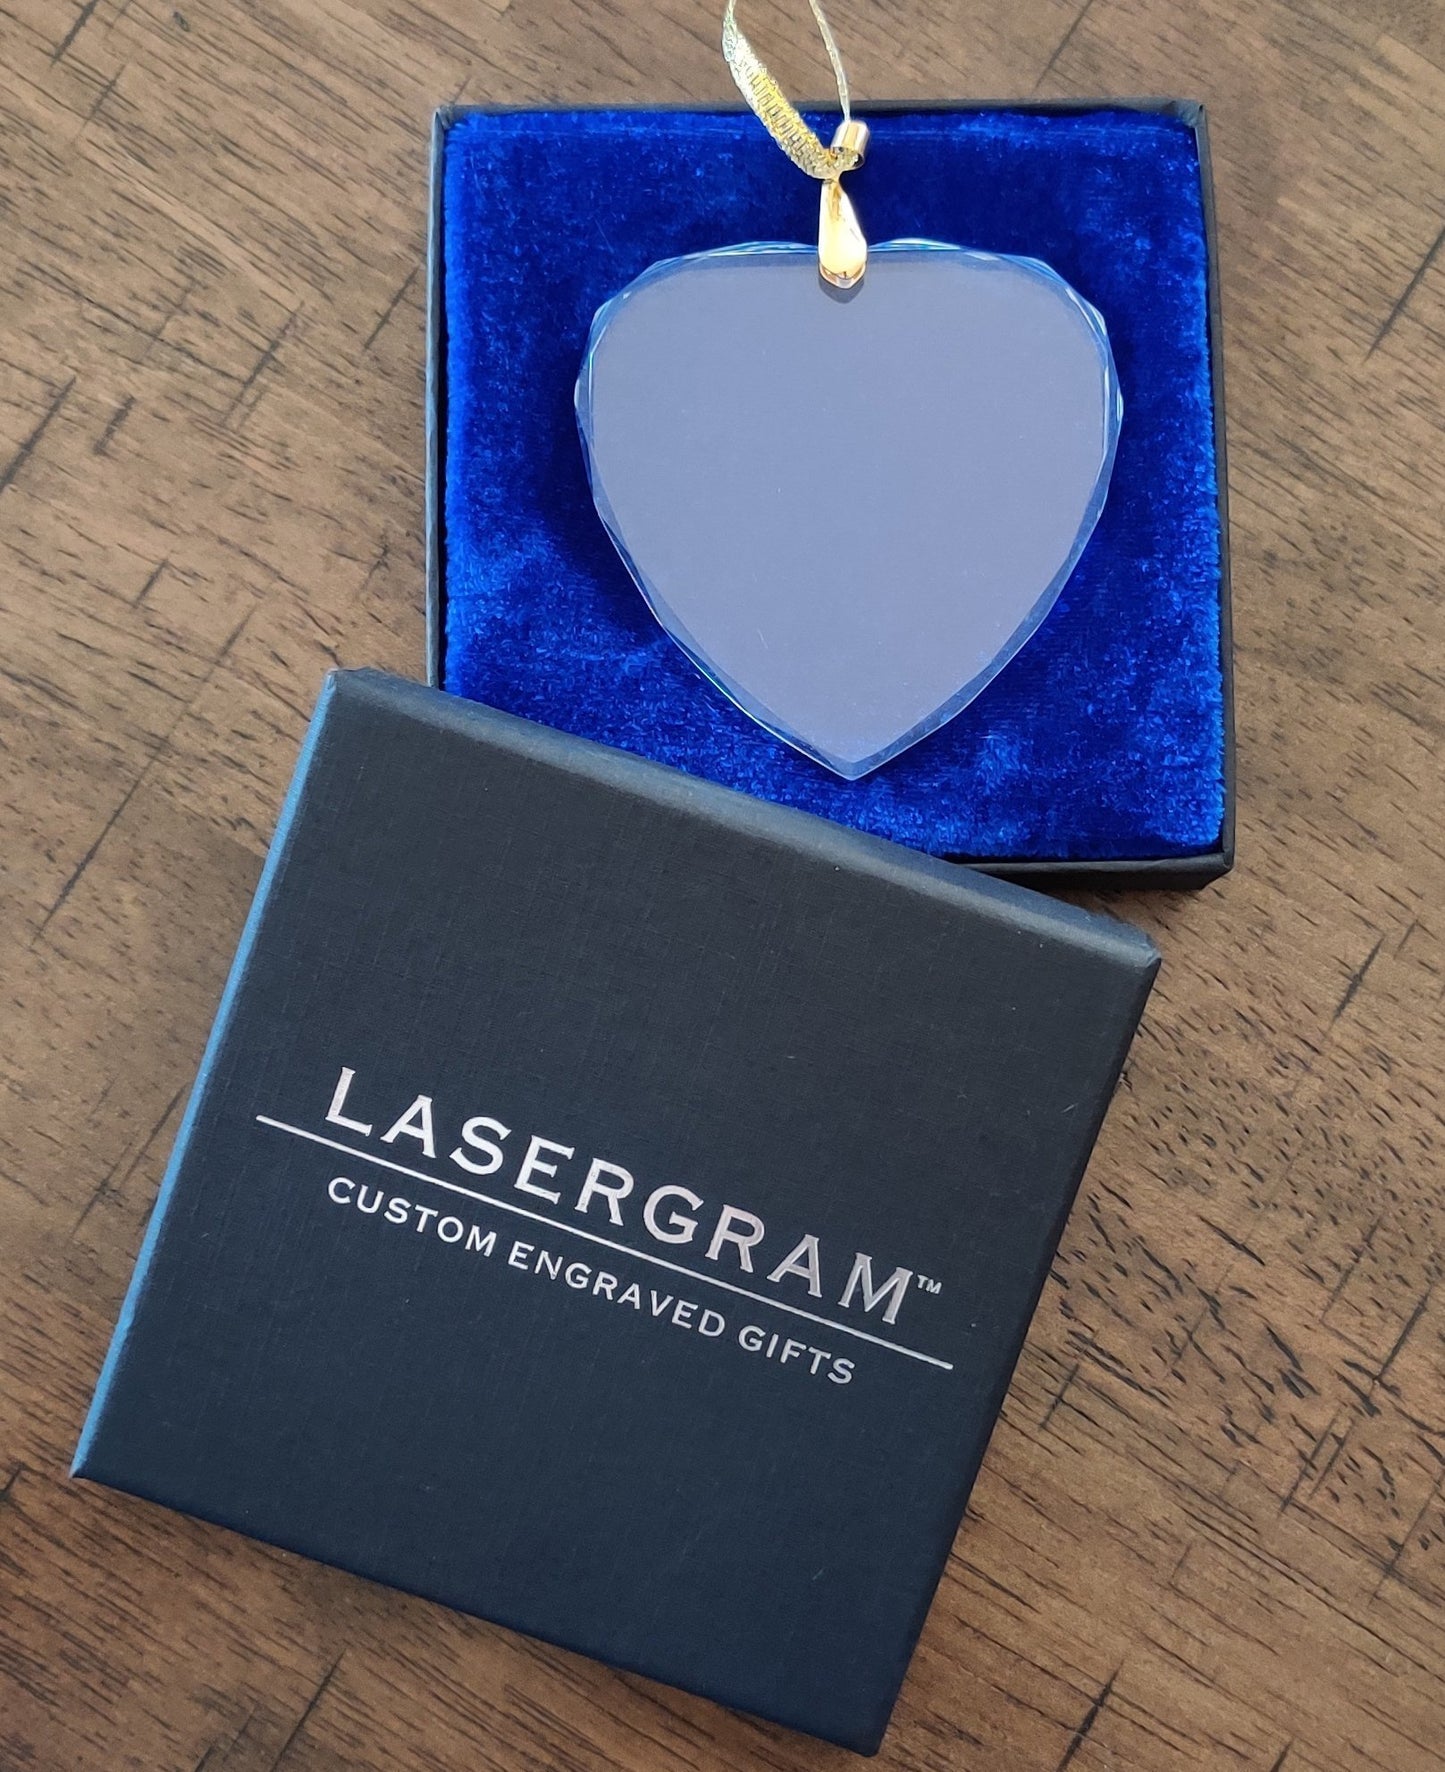 LaserGram Christmas Ornament, Cow, Personalized Engraving Included (Heart Shape)